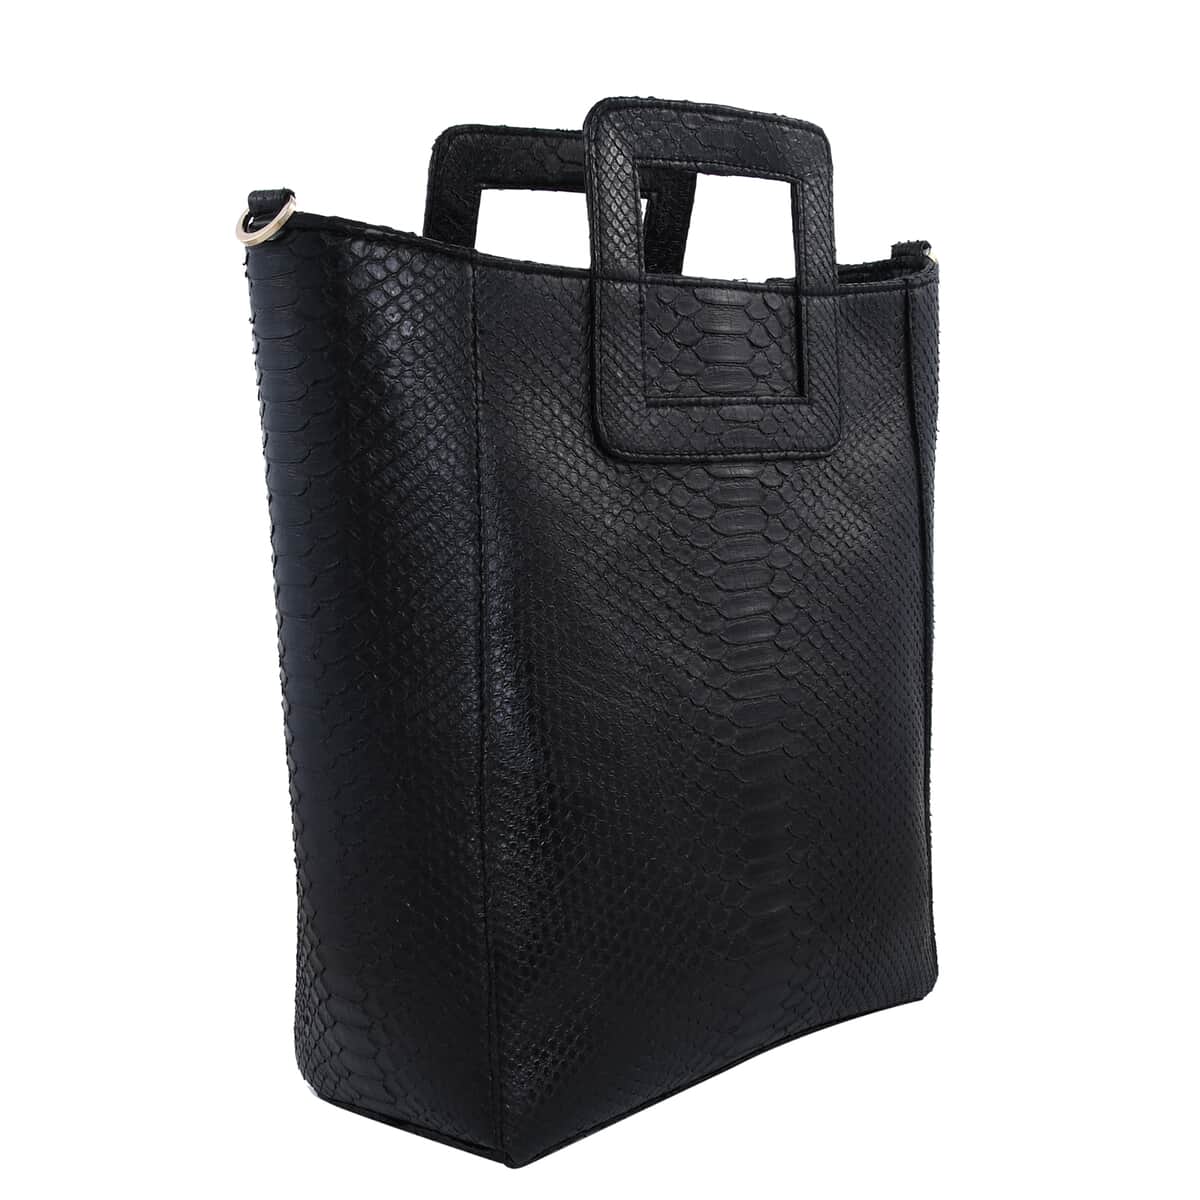 The Grand Pelle Handcrafted 100% Genuine Python Leather Black Color Tote Bag (13.78"x13.78"x5.51") image number 3